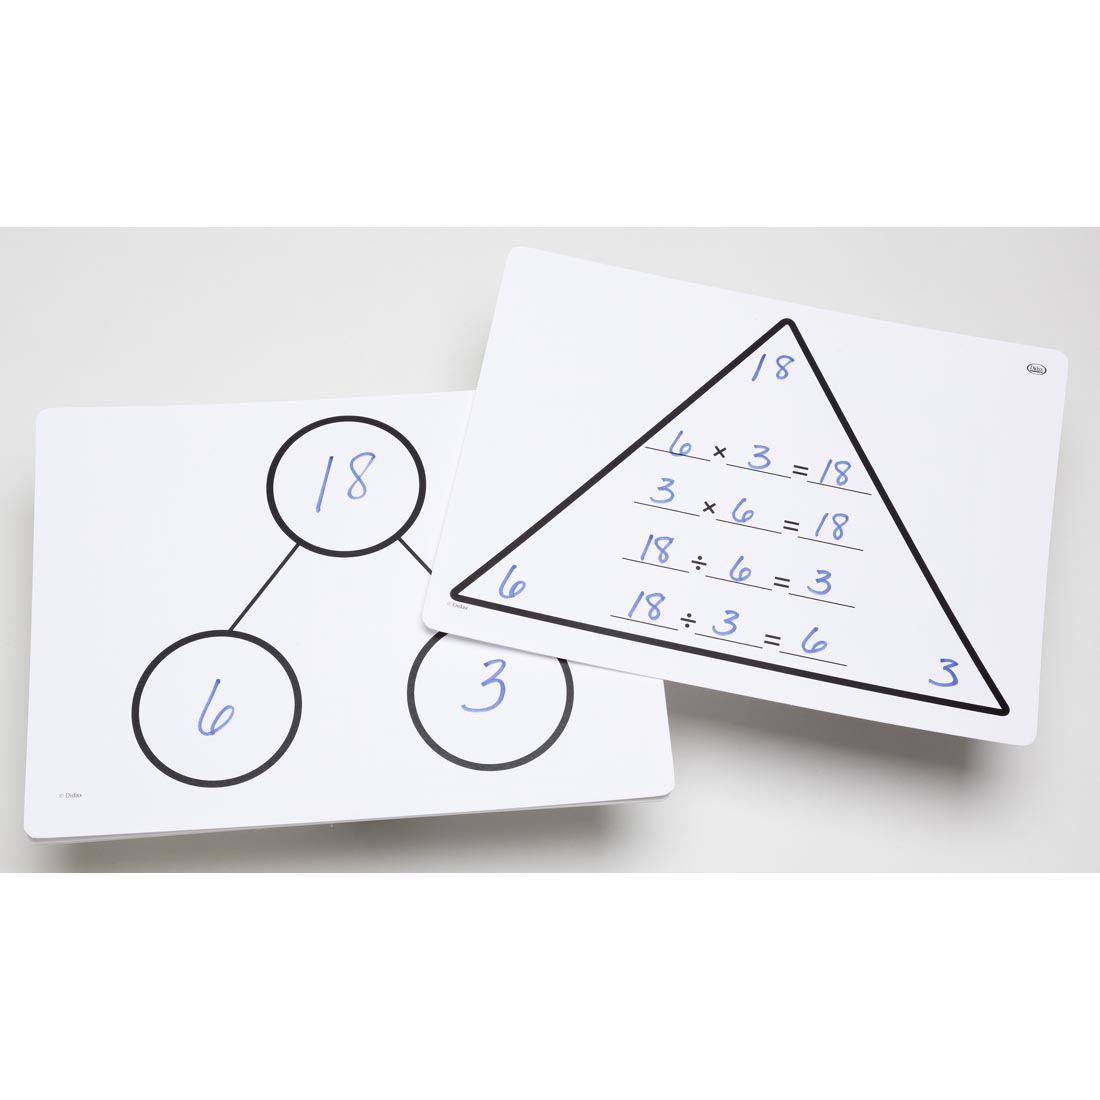 Example Numbers Written on Front and Back Sides of a Write-On/Wipe-Off Multiplication/Division Fact Family Triangle Mat by Didax